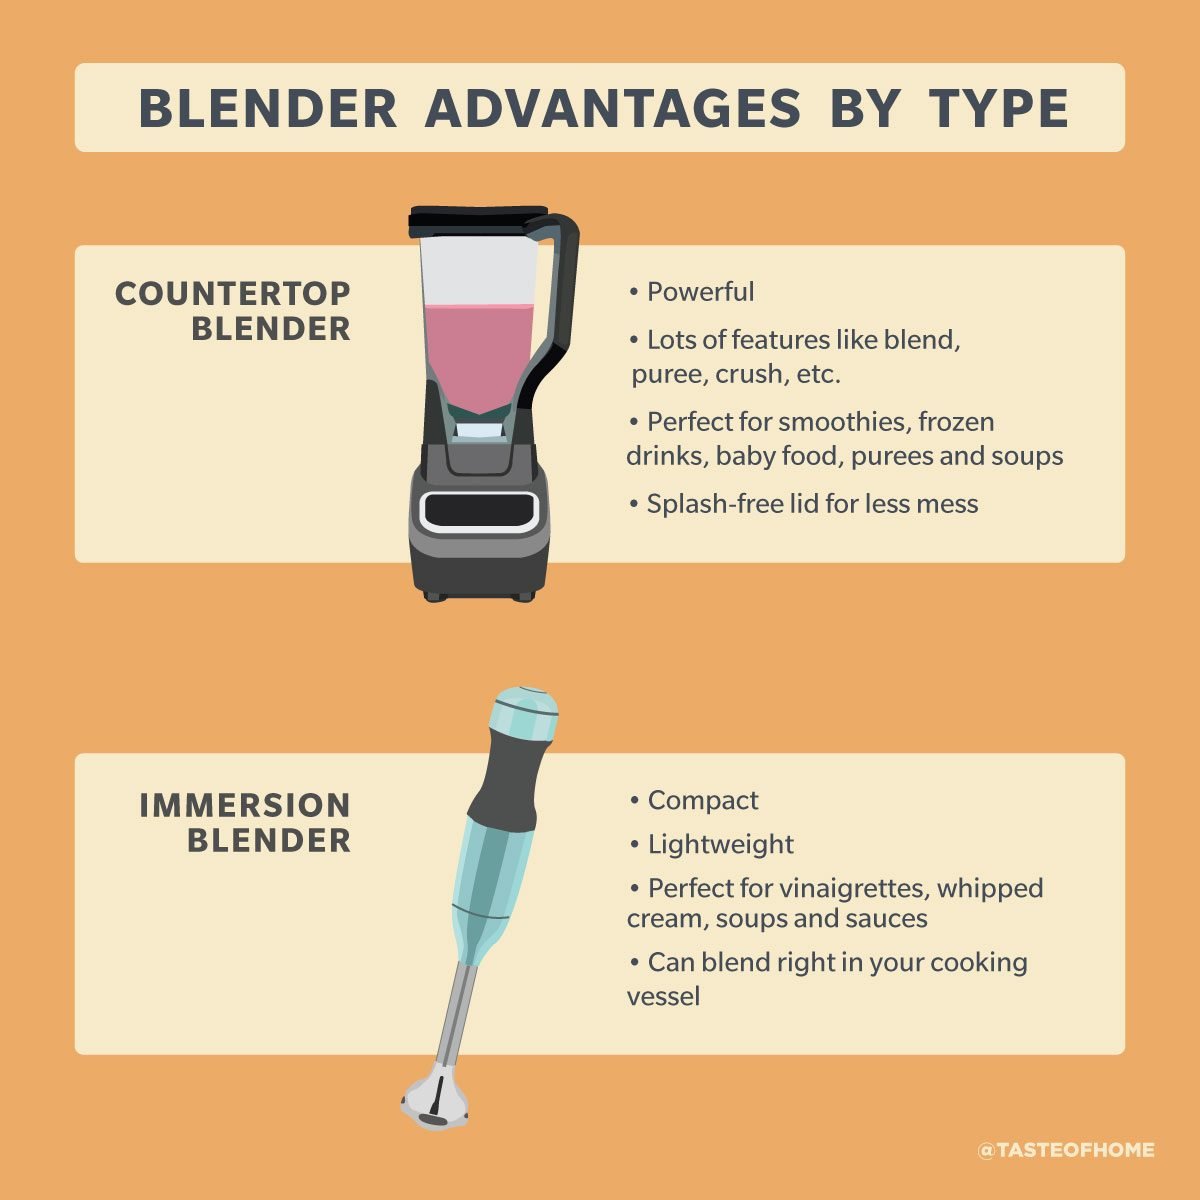 https://www.tasteofhome.com/wp-content/uploads/2022/02/different-blender-advantages-by-type-graphic-1200x1200-1.jpg?fit=680%2C680